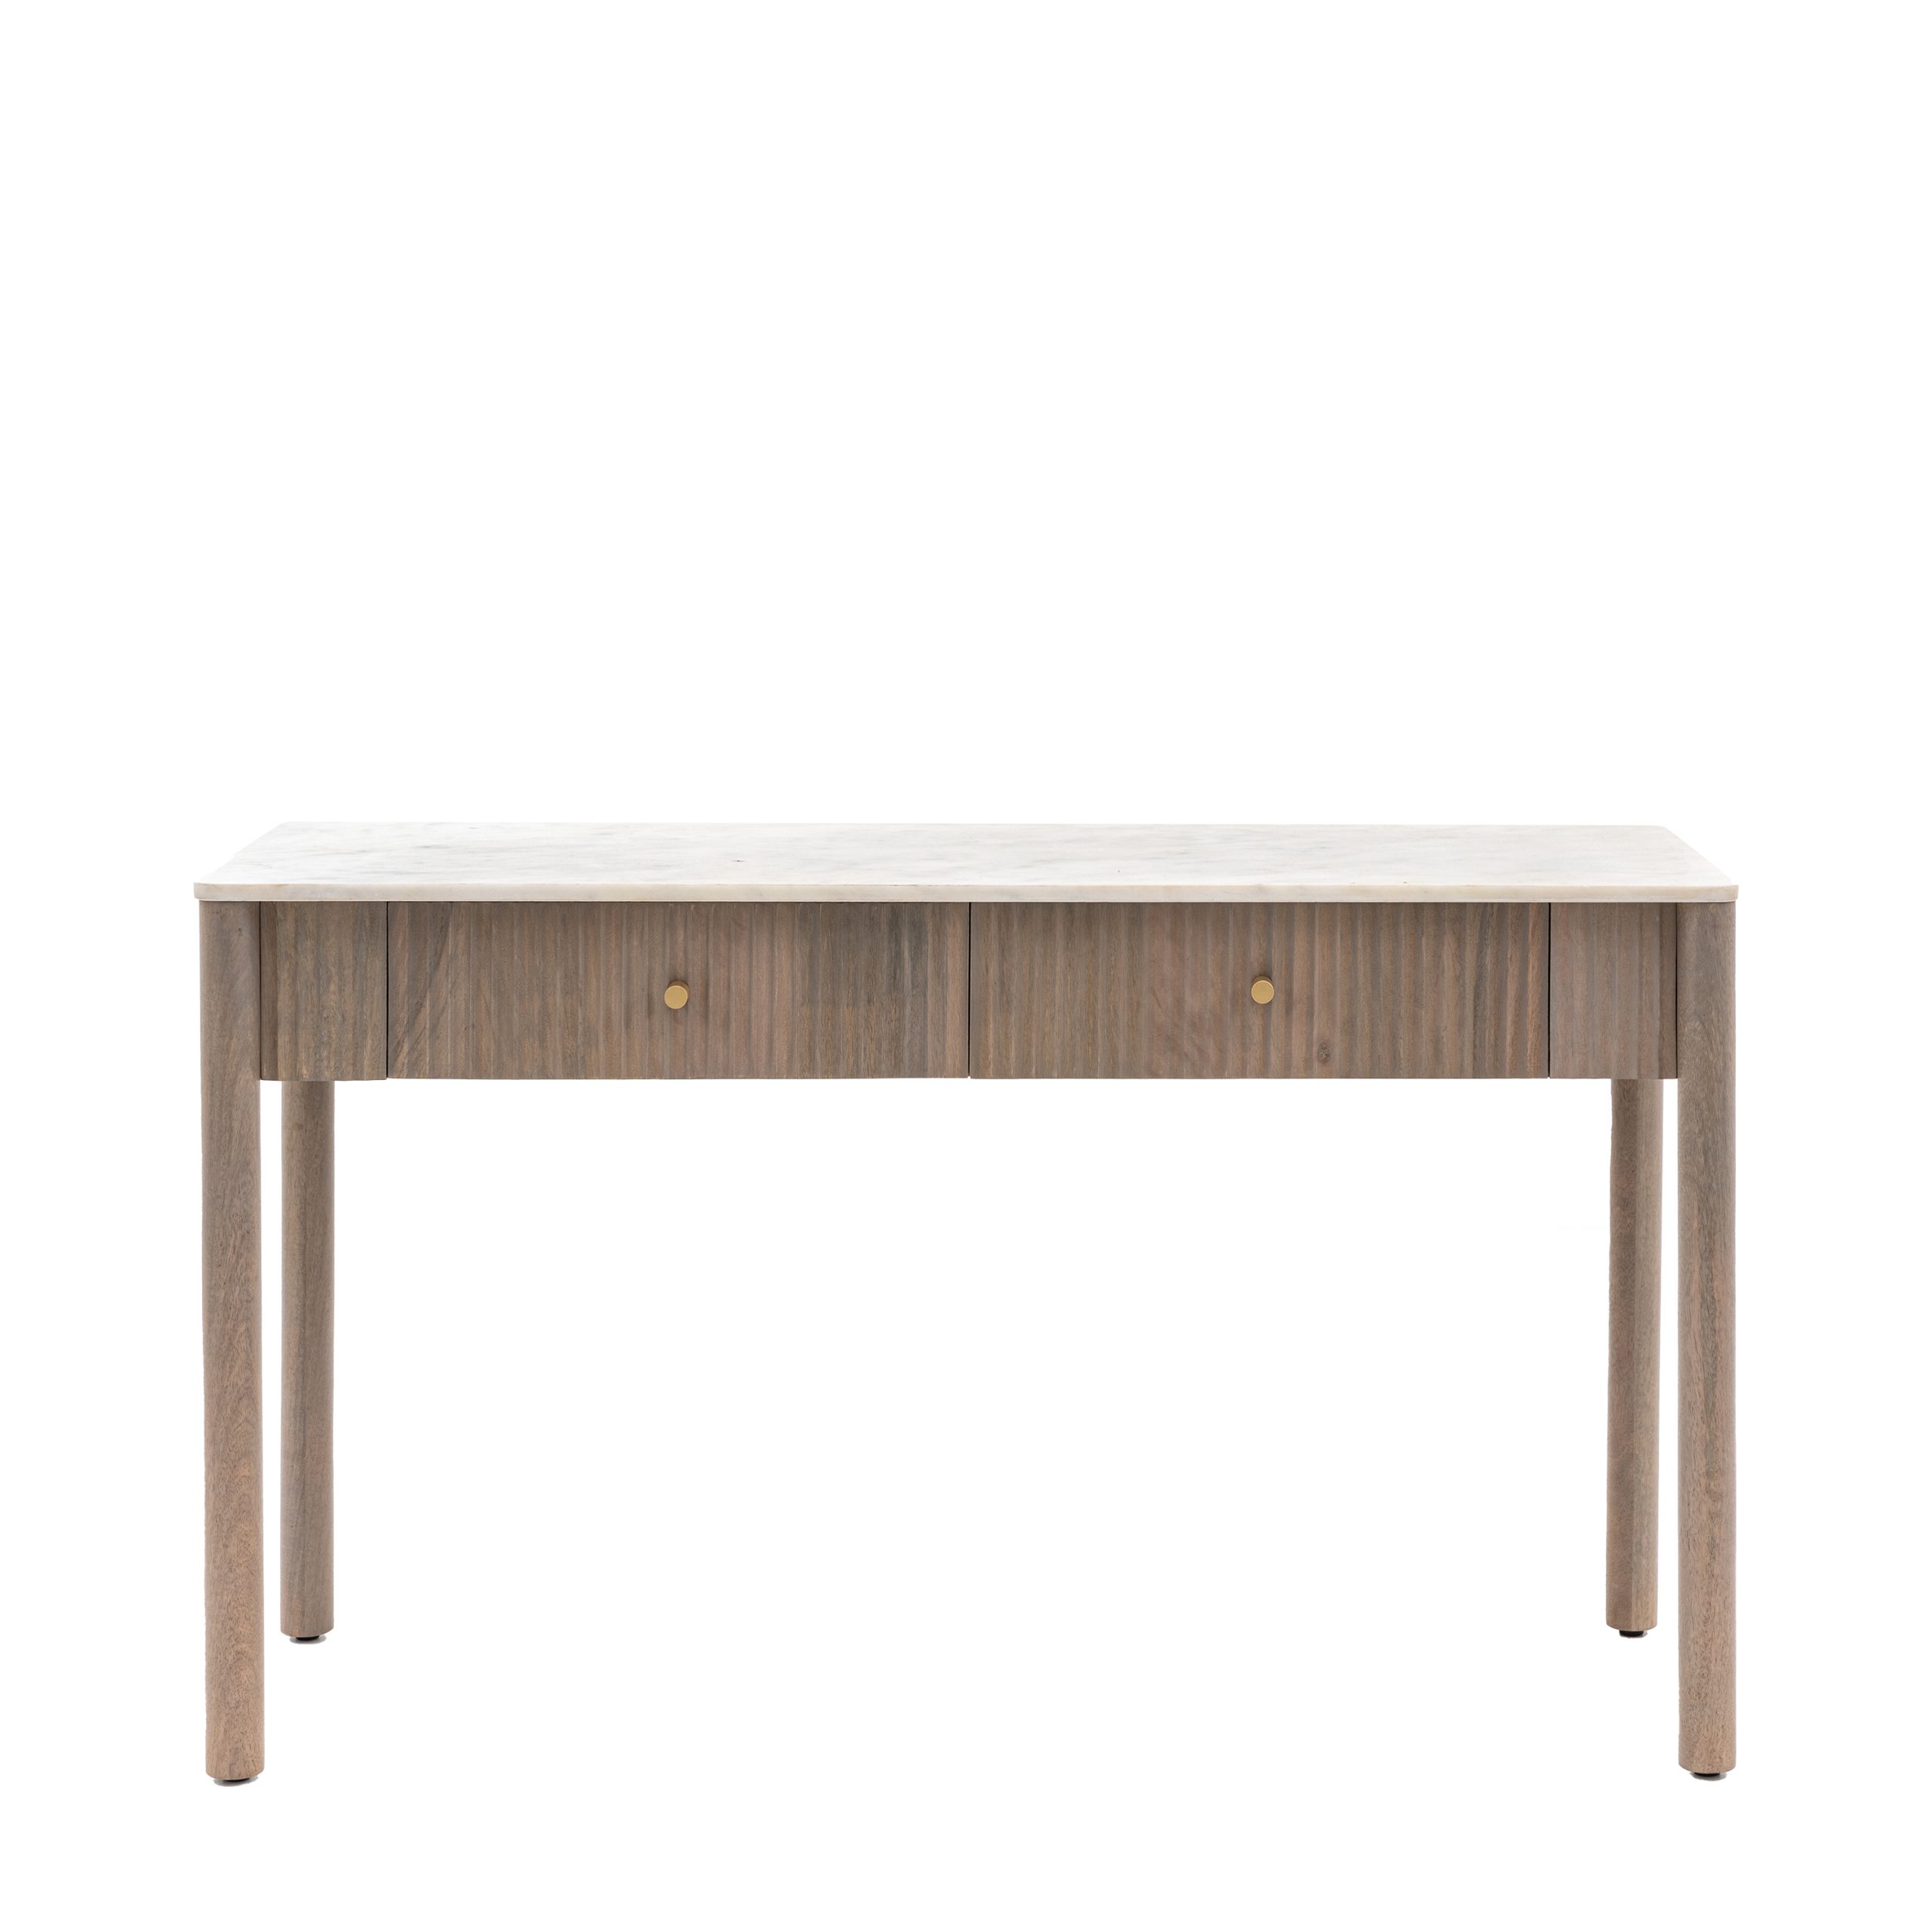 Gallery Direct Marmo 2 Drawer Console